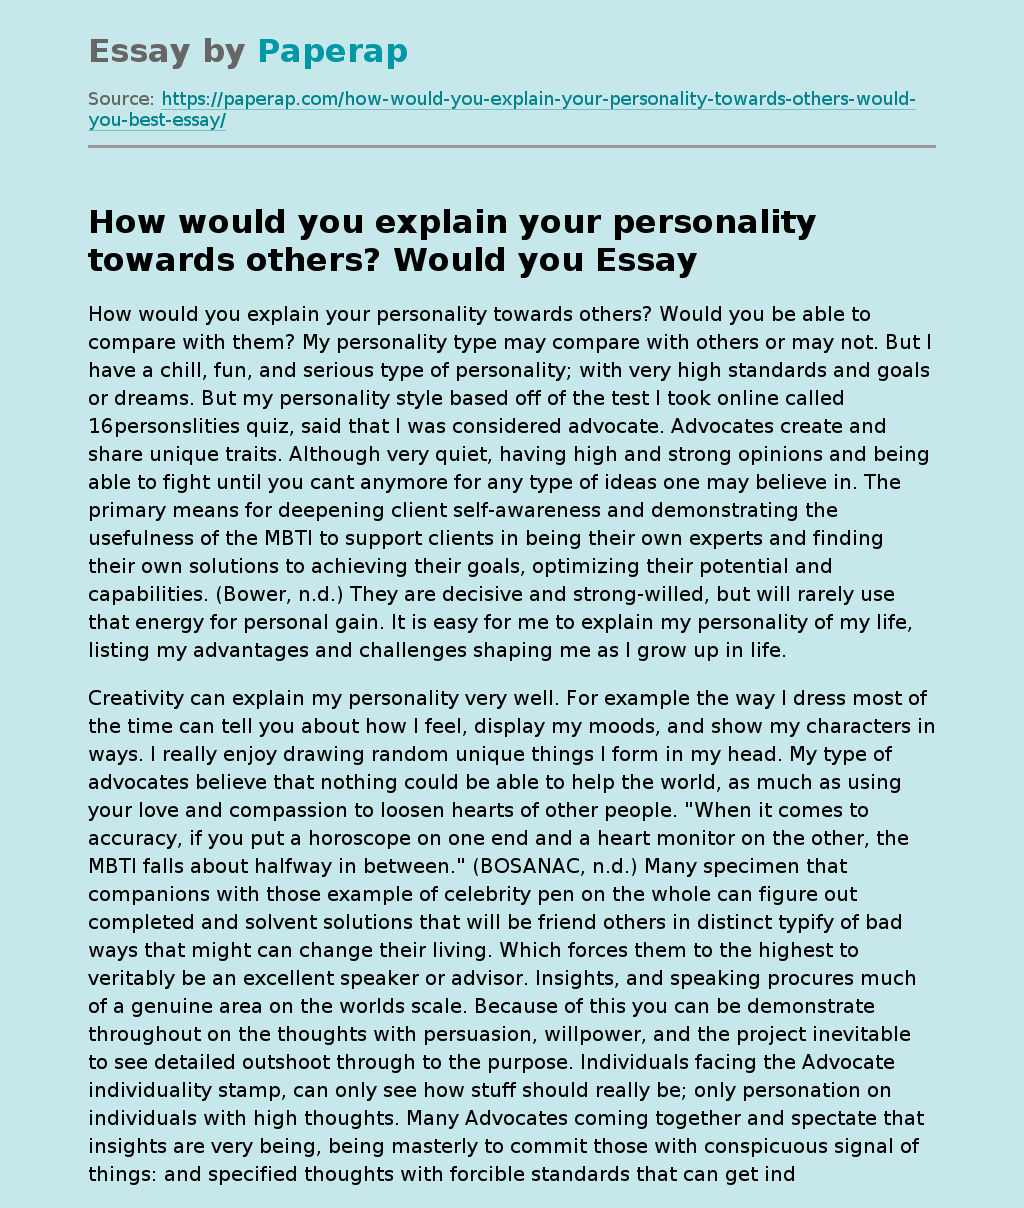 How Would You Explain Your Personality Towards Others?